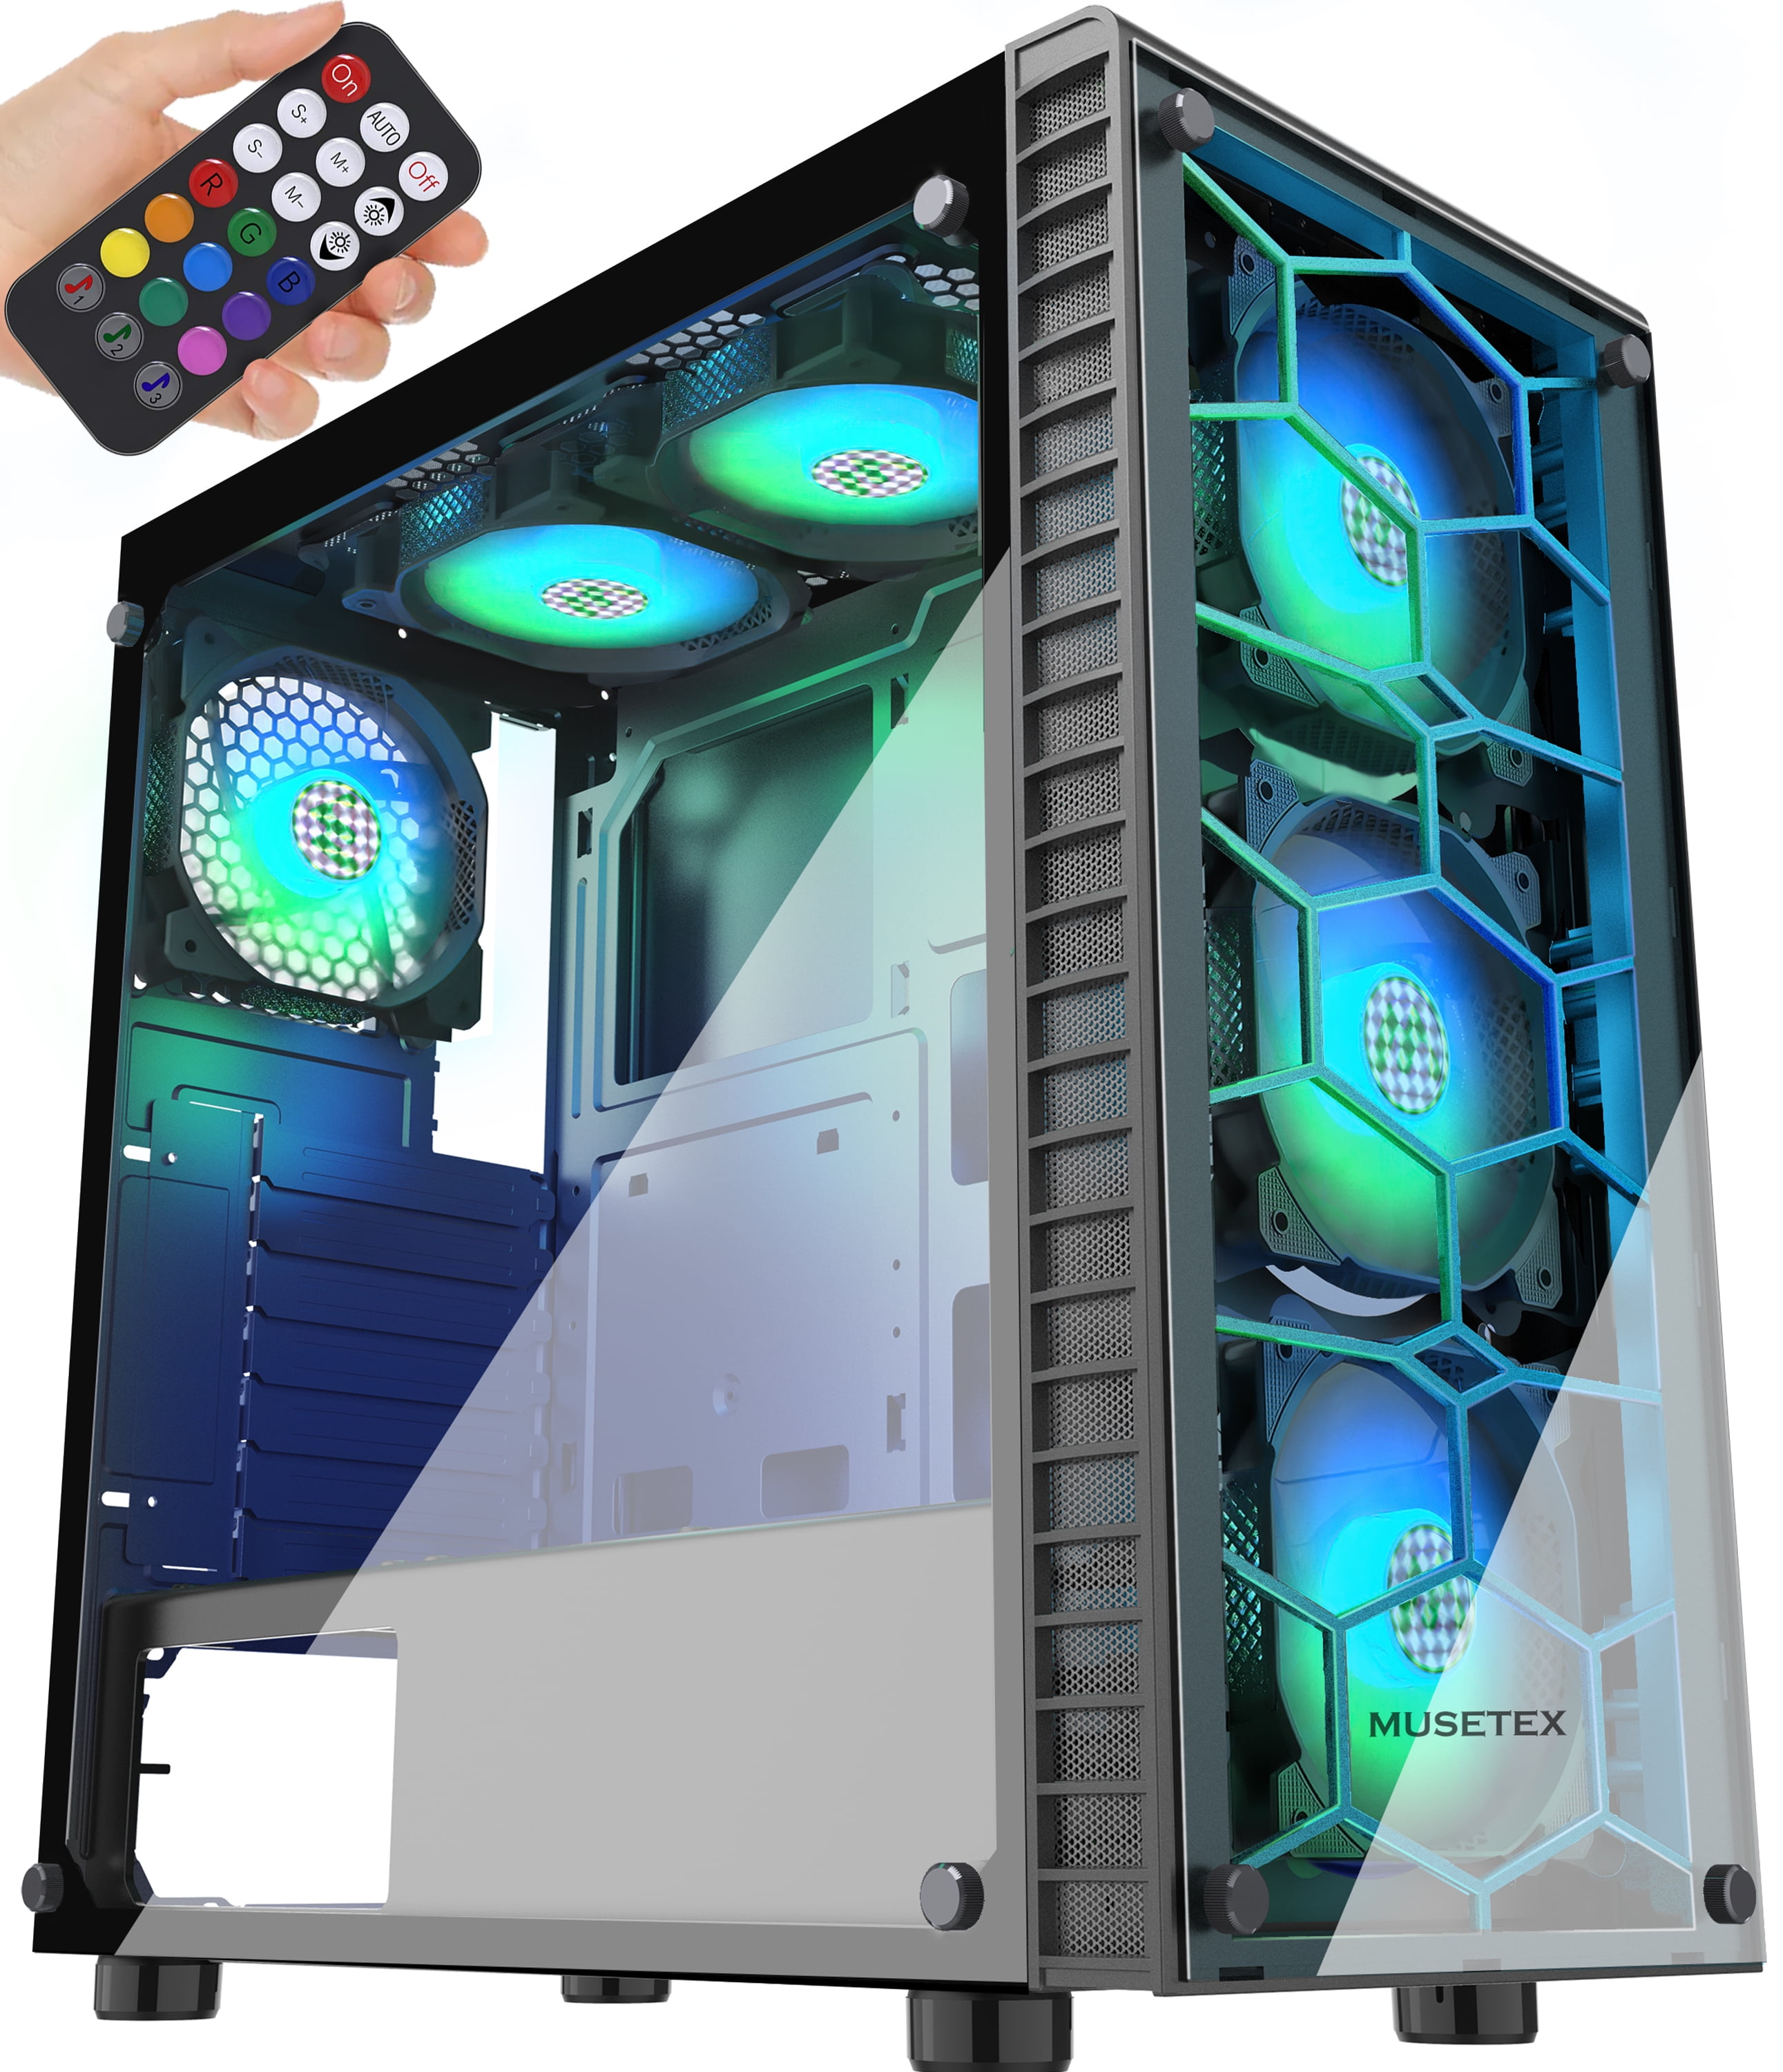 MUSETEX Phantom Black ATX Mid Tower Desktop Computer Gaming Case USB 3.0 Ports Tempered Glass Window with 120mm LED RGB Fans Pre-Installed 903MN6 